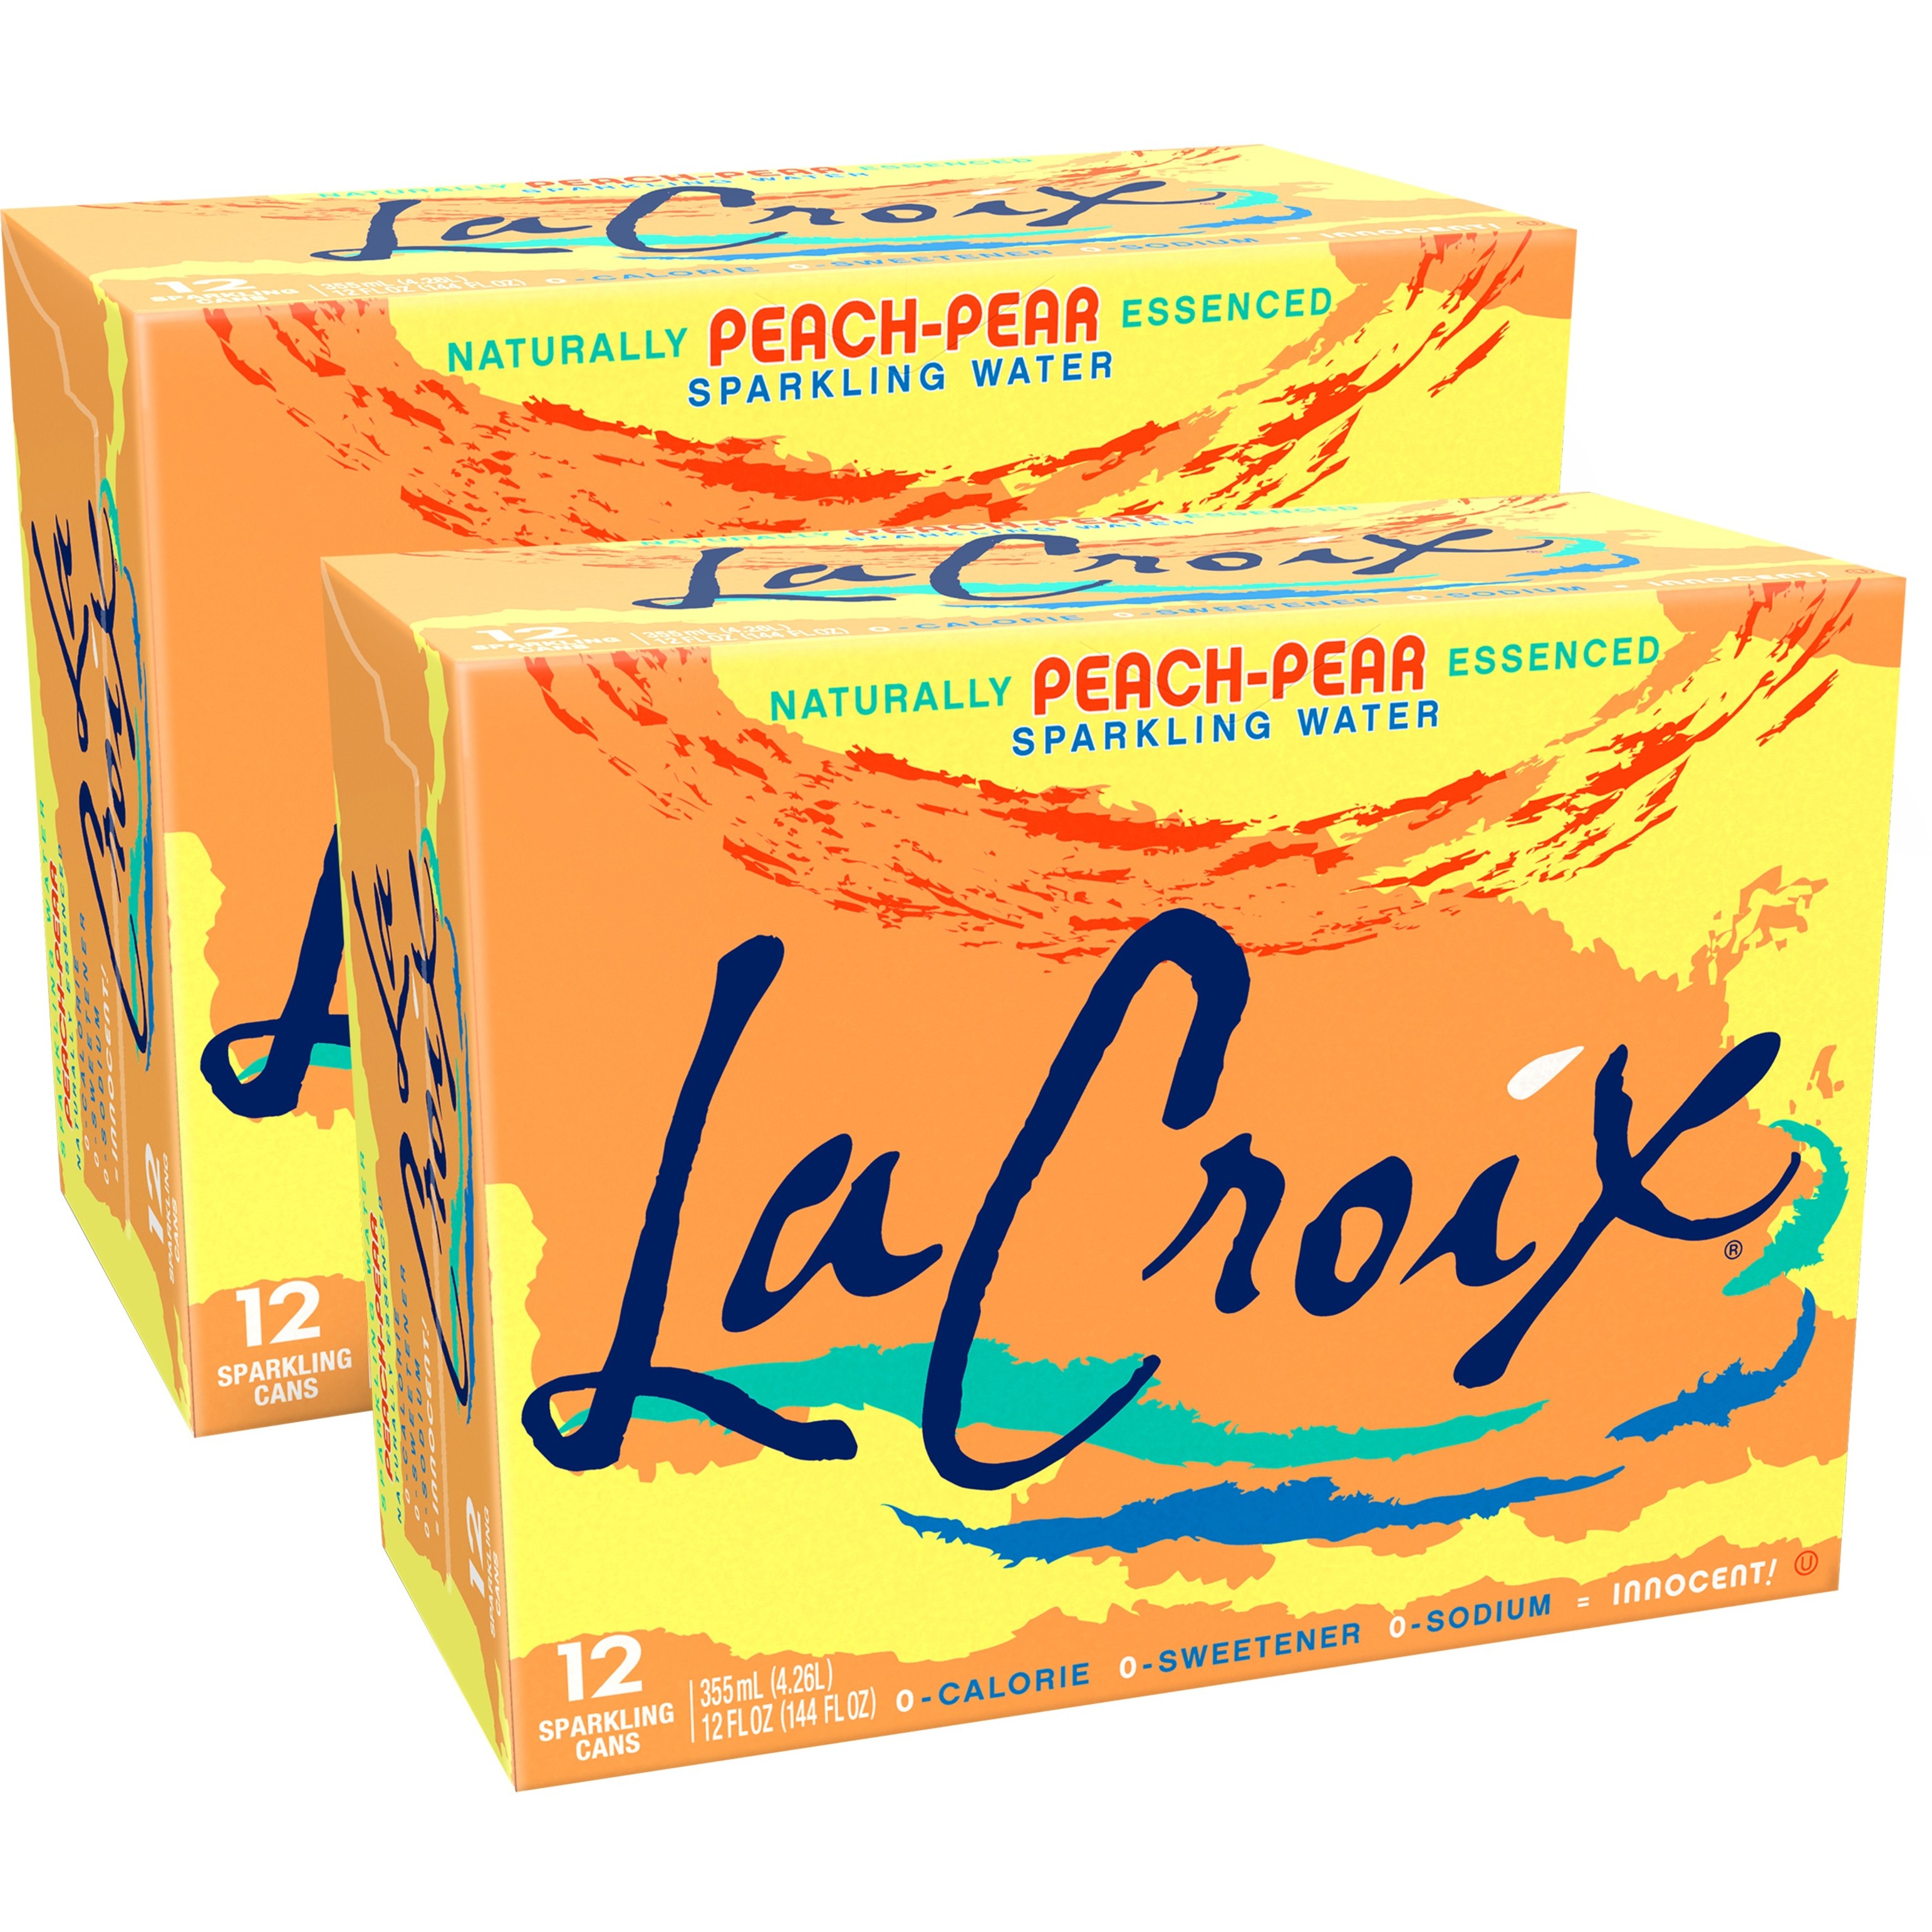 LaCroix Sparkling Water, Peach-Pear- 2/12 packs 12 oz - image 1 of 5